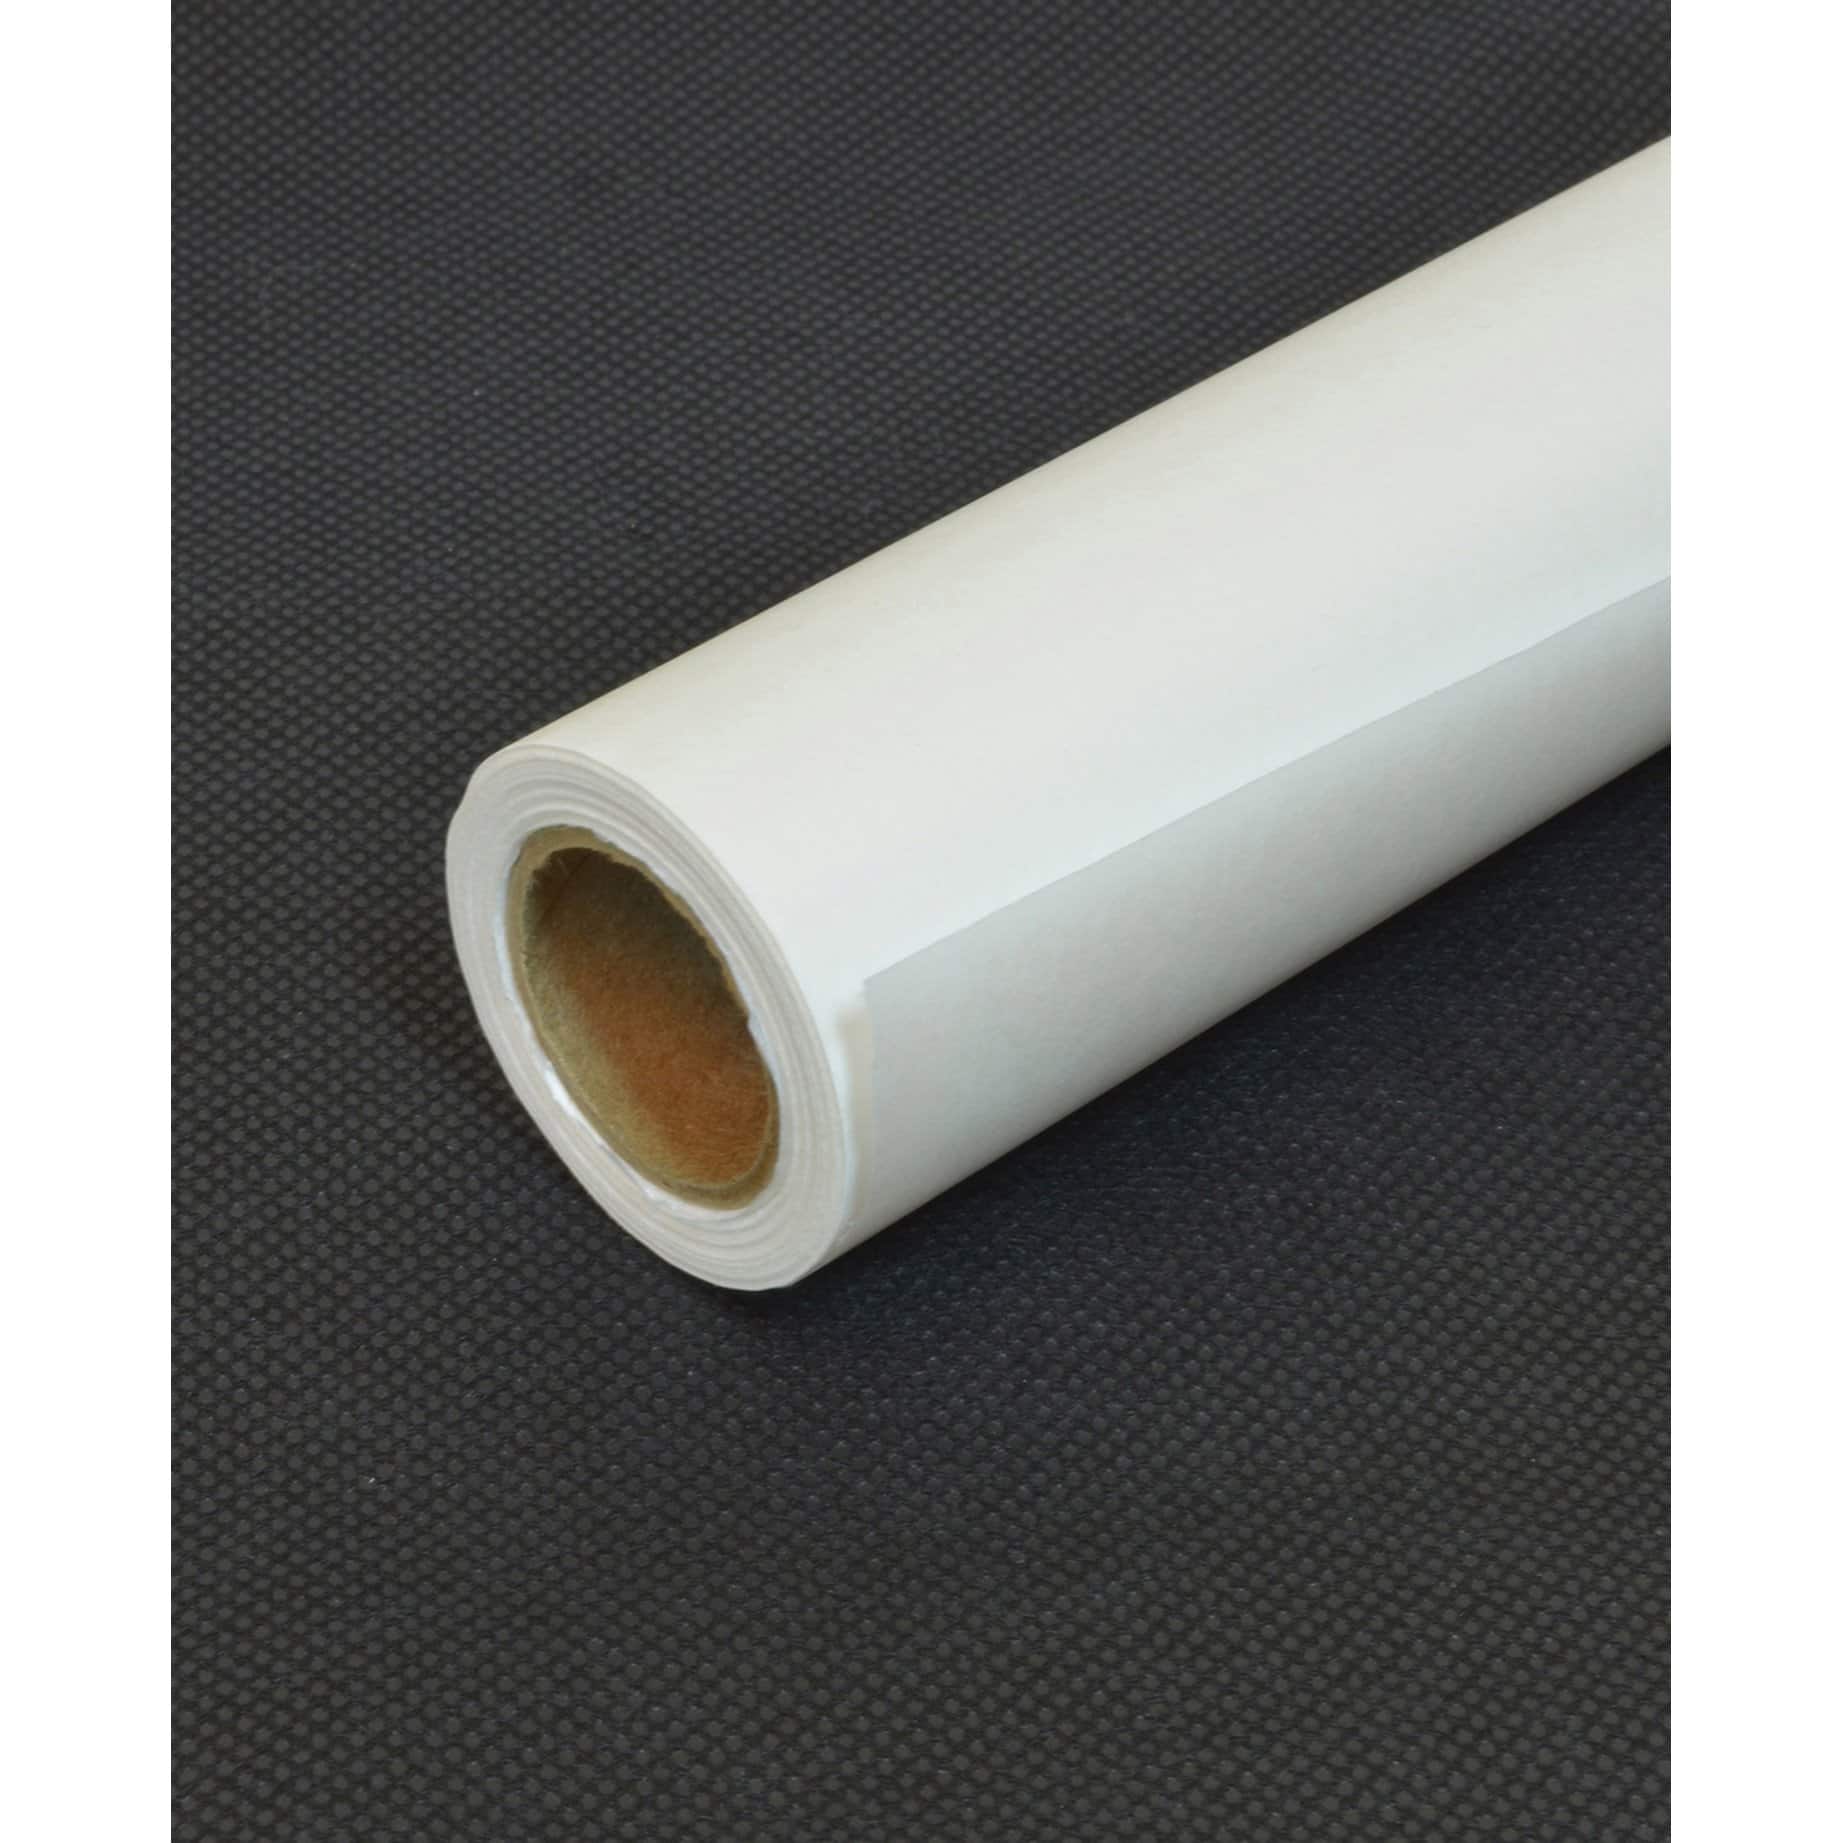 Best Deal for Tracing Paper Roll, Sewing Pattern Paper Good Ink